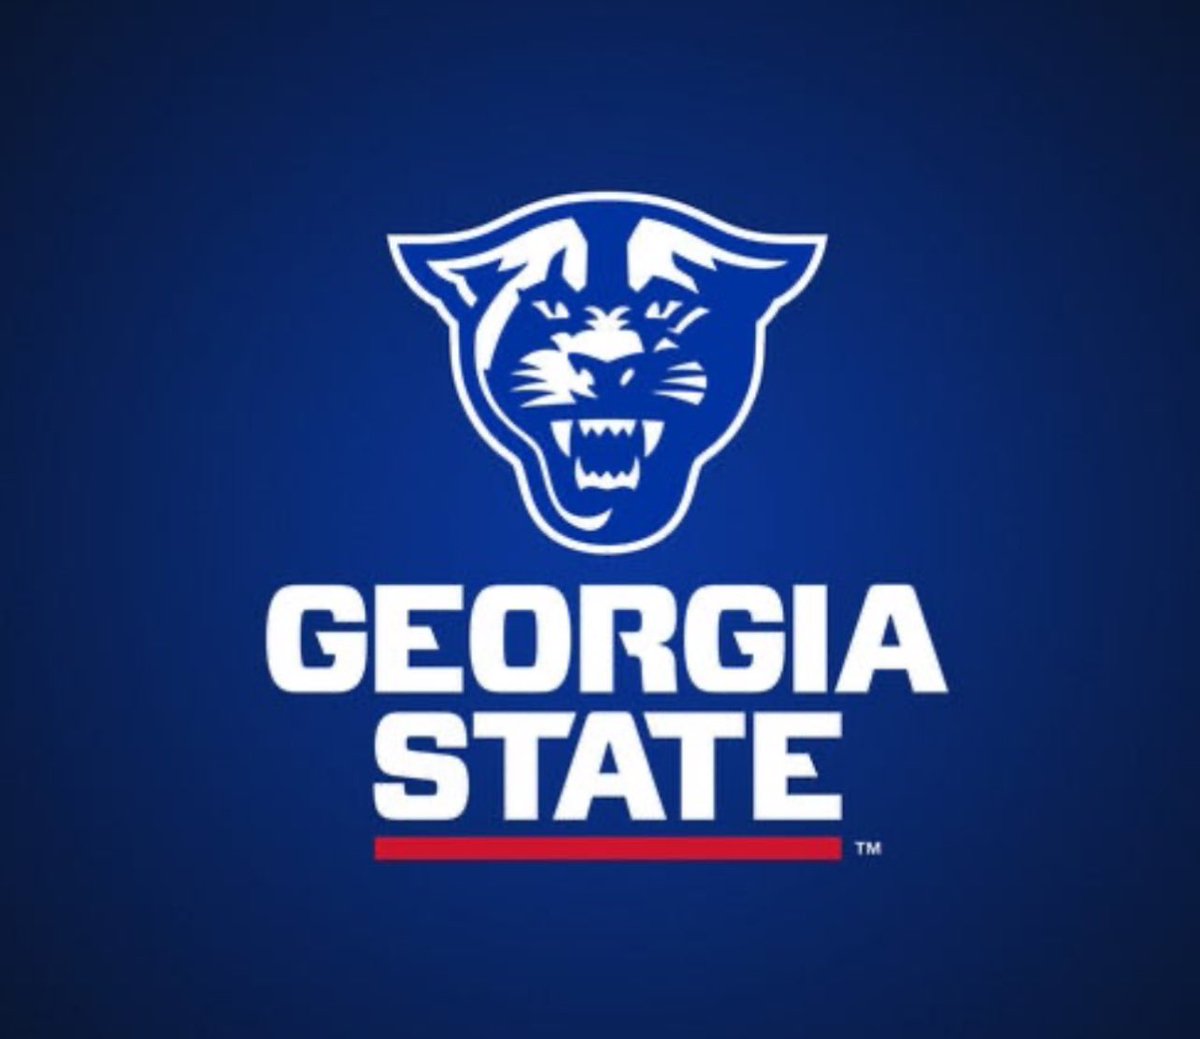 Thankful to receive an offer from Georgia State! #GoPanthers